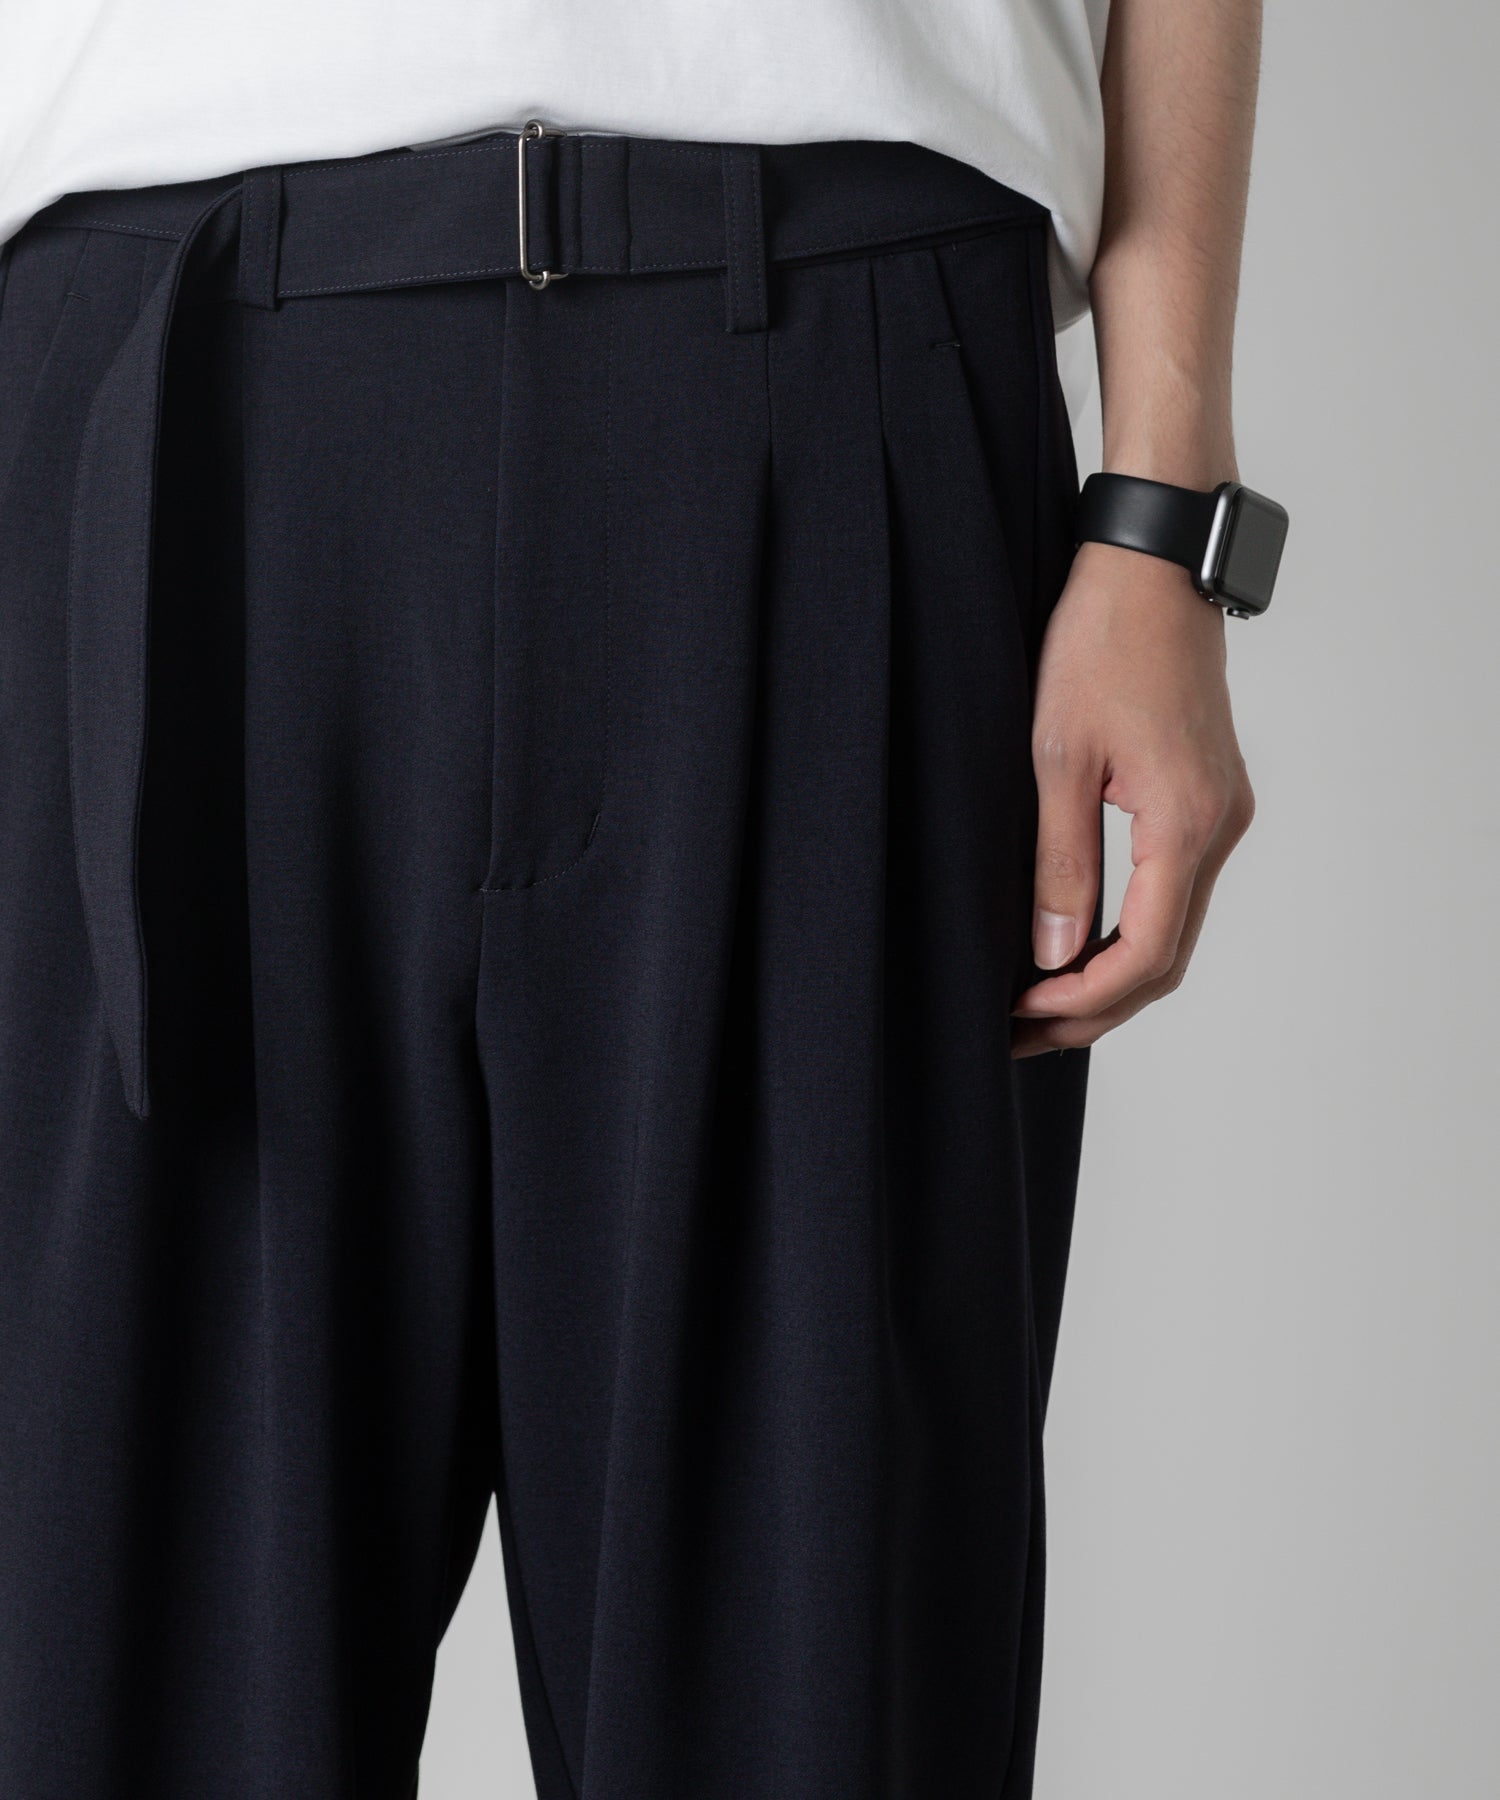 ATTACHMENT アタッチメントのPE STRECH DOUBLE CLOTH BELTED TAPERD FIT TROUSERS - NAVYの公式通販サイトsession福岡セレクトショップ